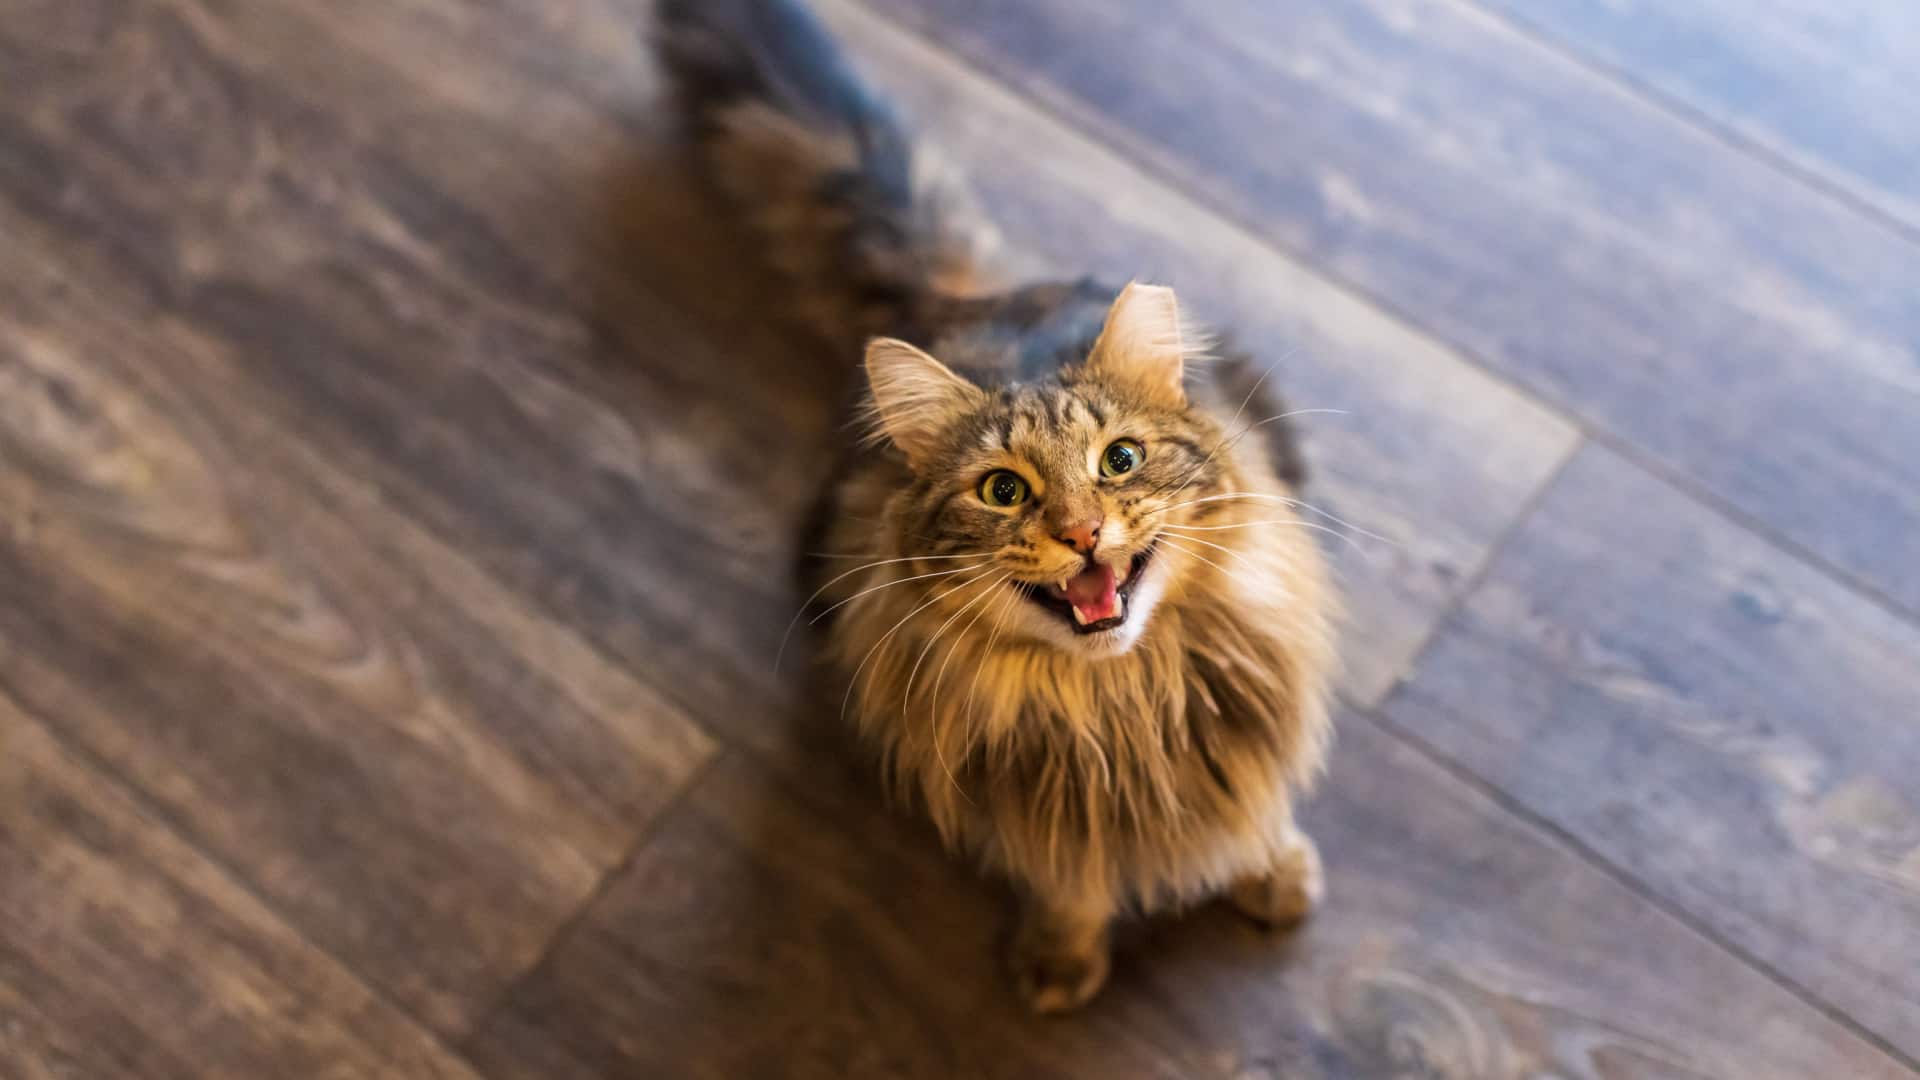 long haired tabby cat making a clicking noise with mouth